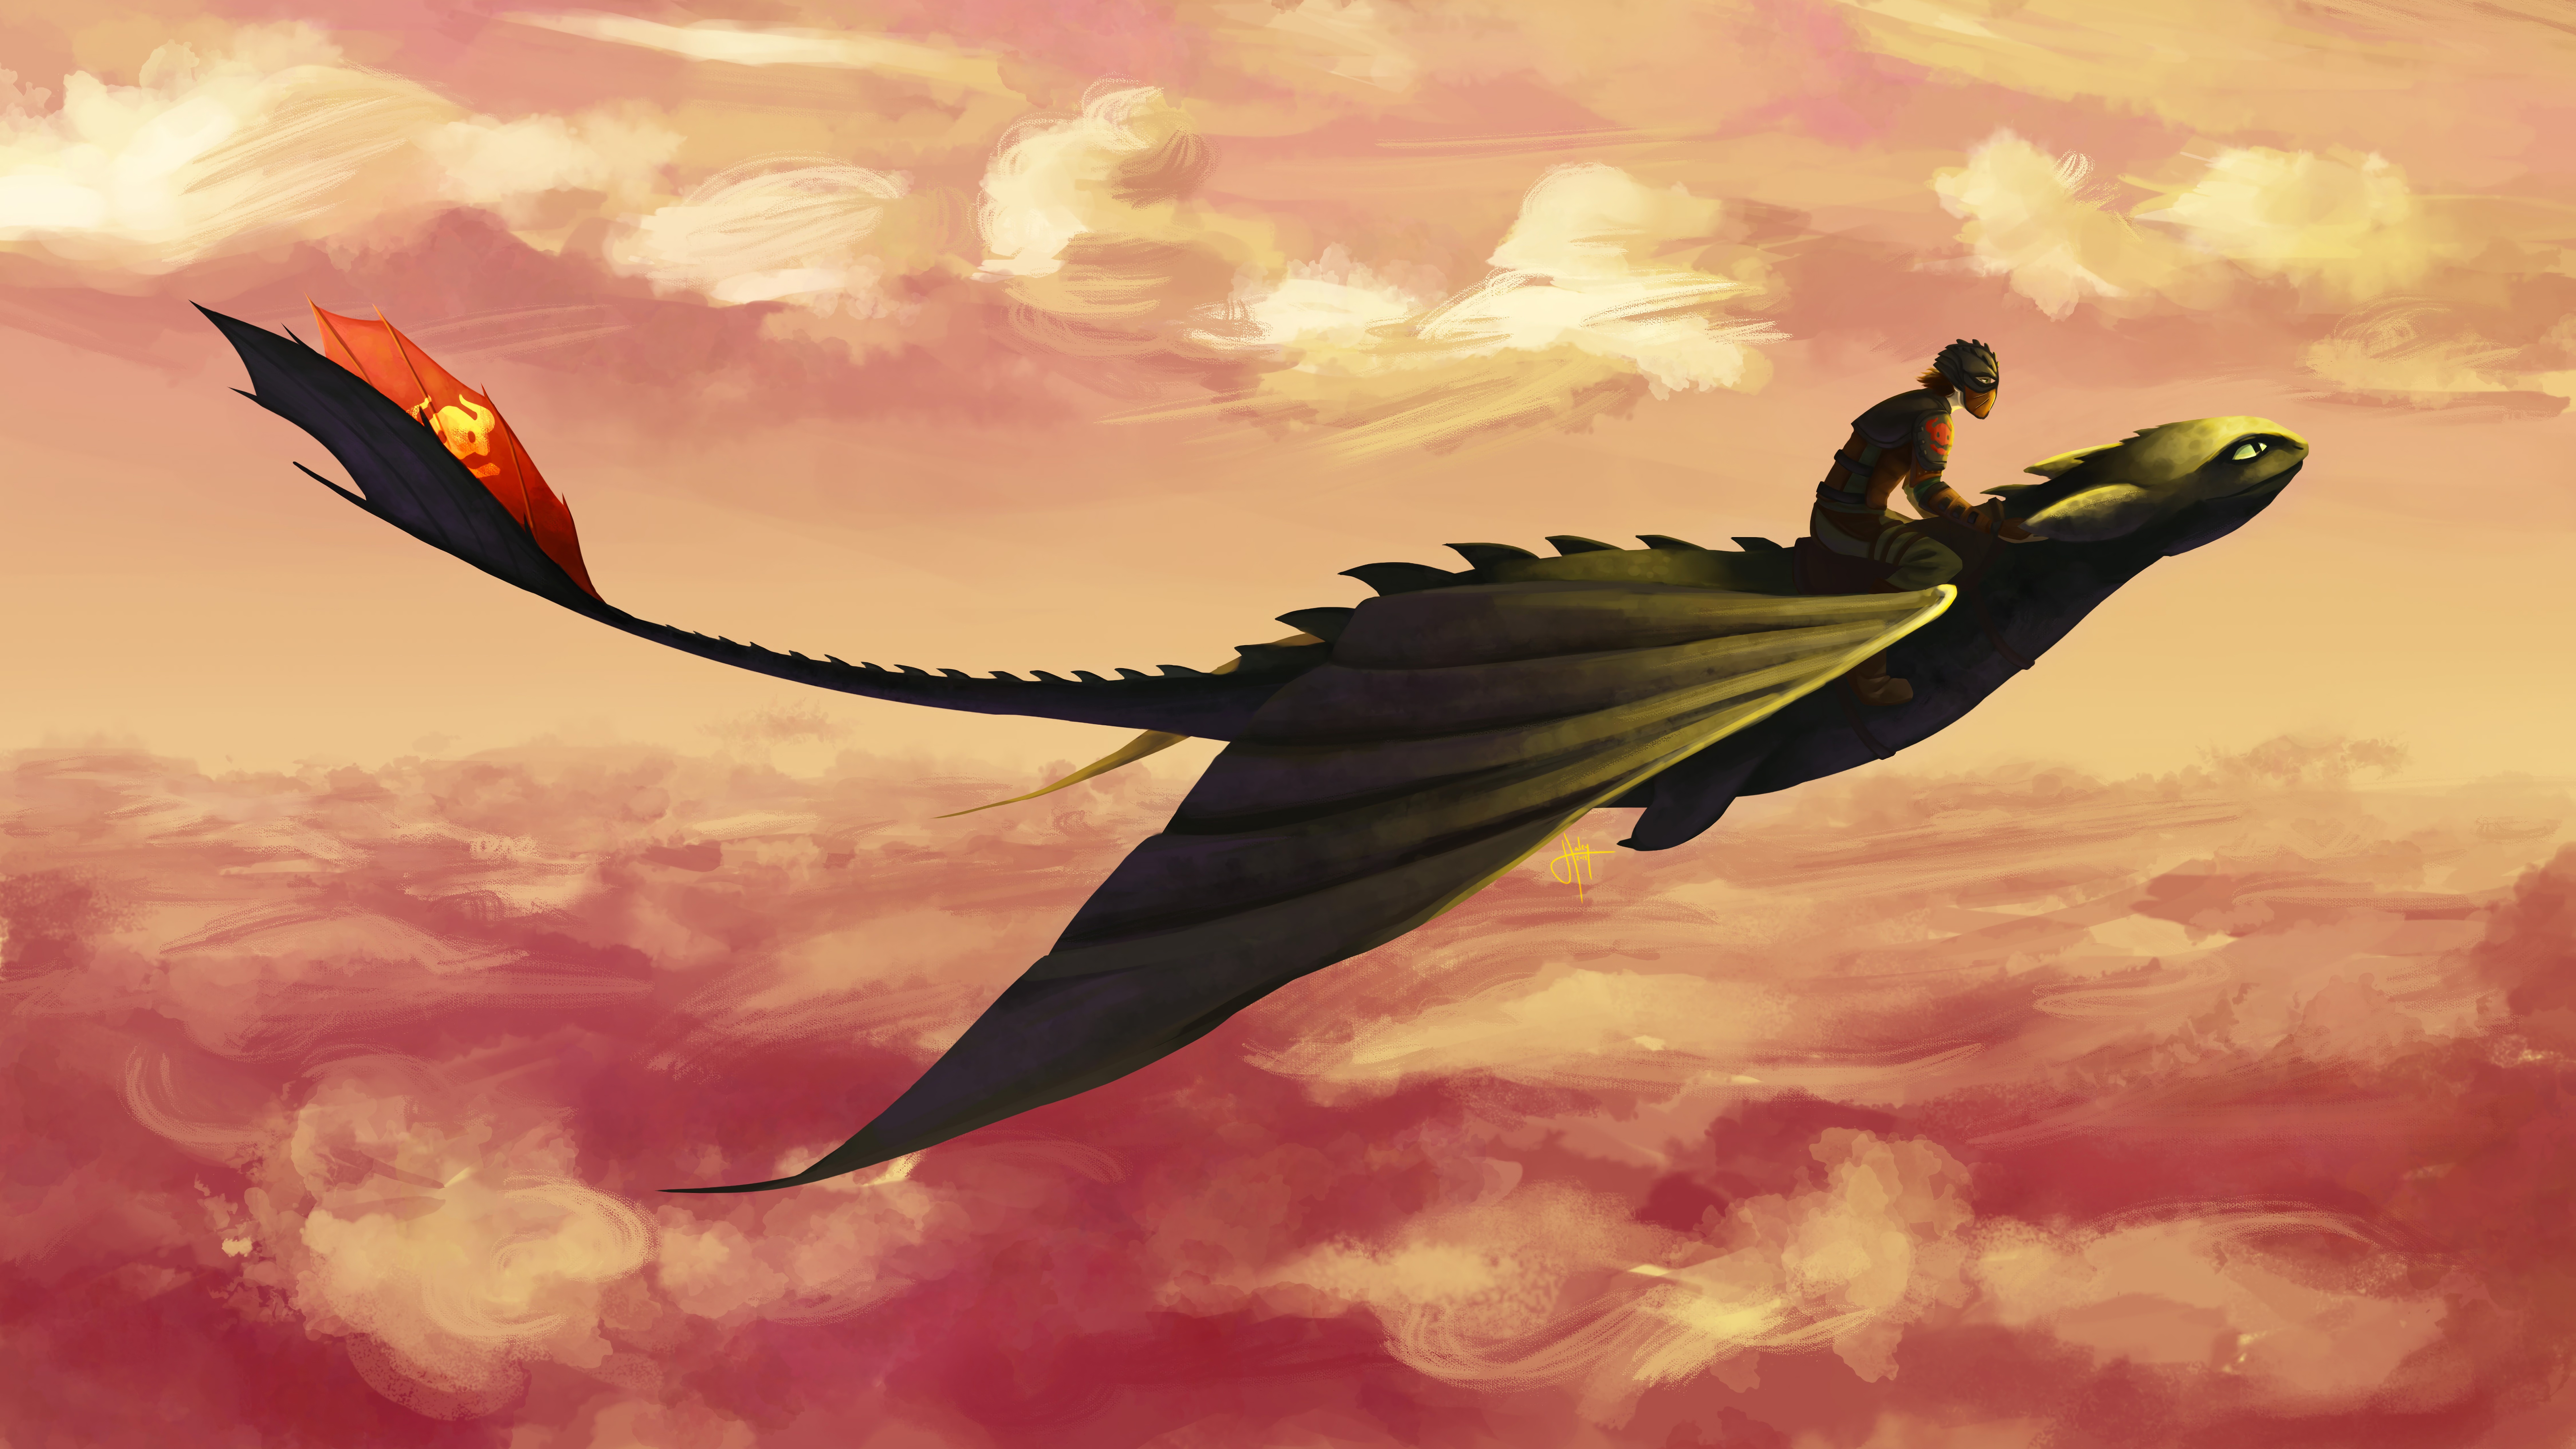 How to Train Your Dragon 2 8k Ultra HD Wallpaper by Haley Wakefield